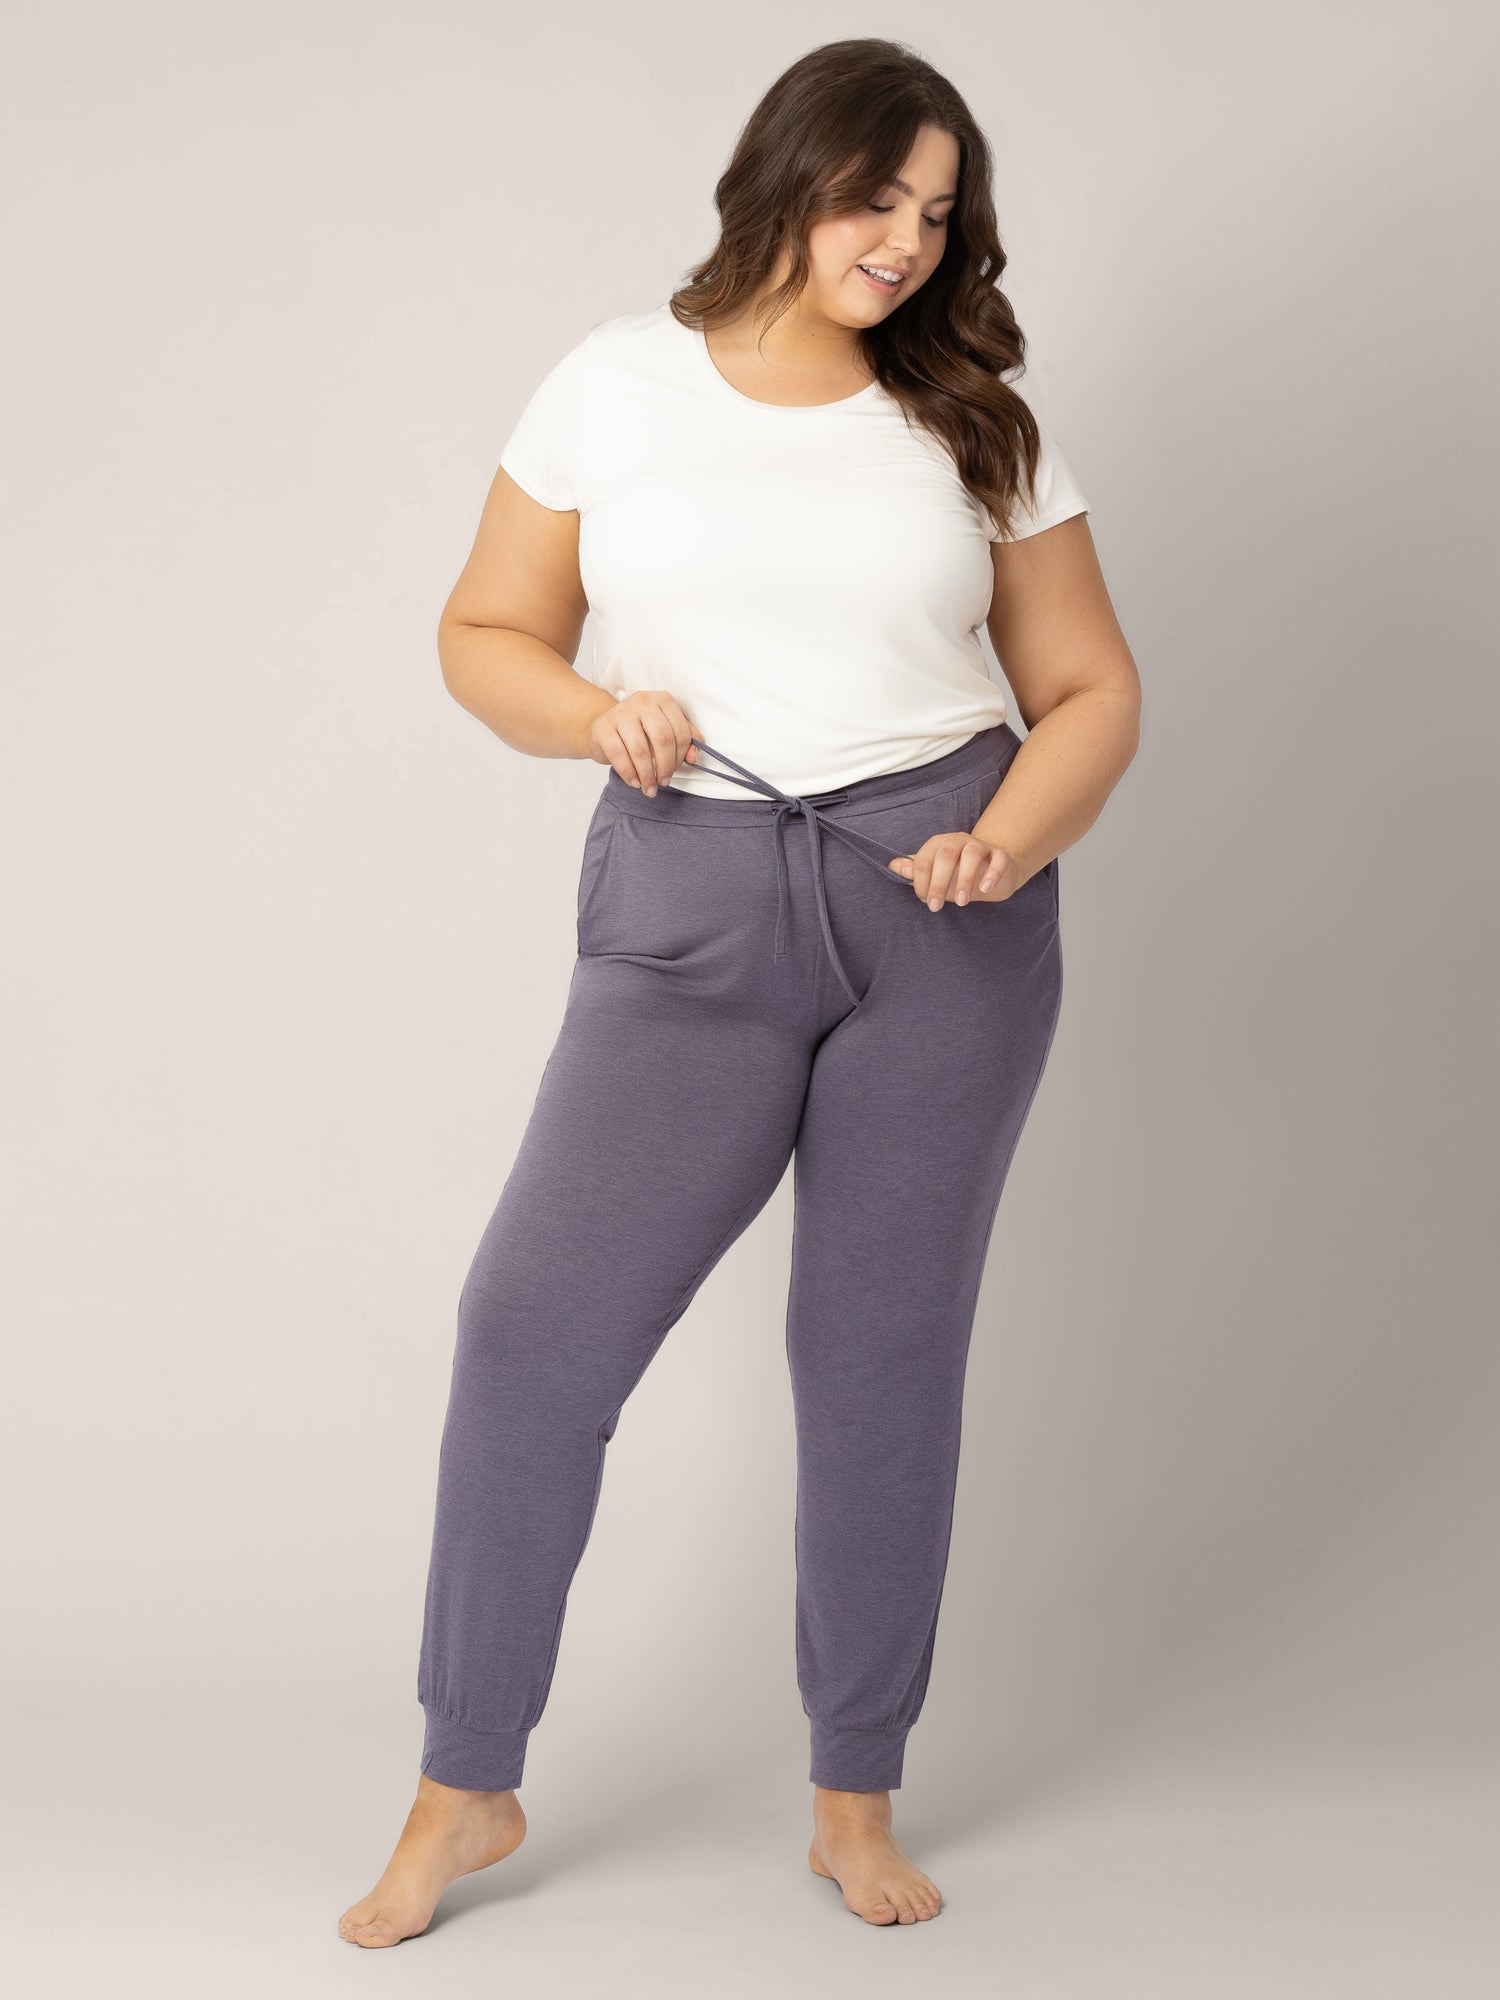 Model wearing the Everyday Lounge Jogger in Heathered Granite @model_info:Bailey is 5'11" and is wearing a 1X Long.